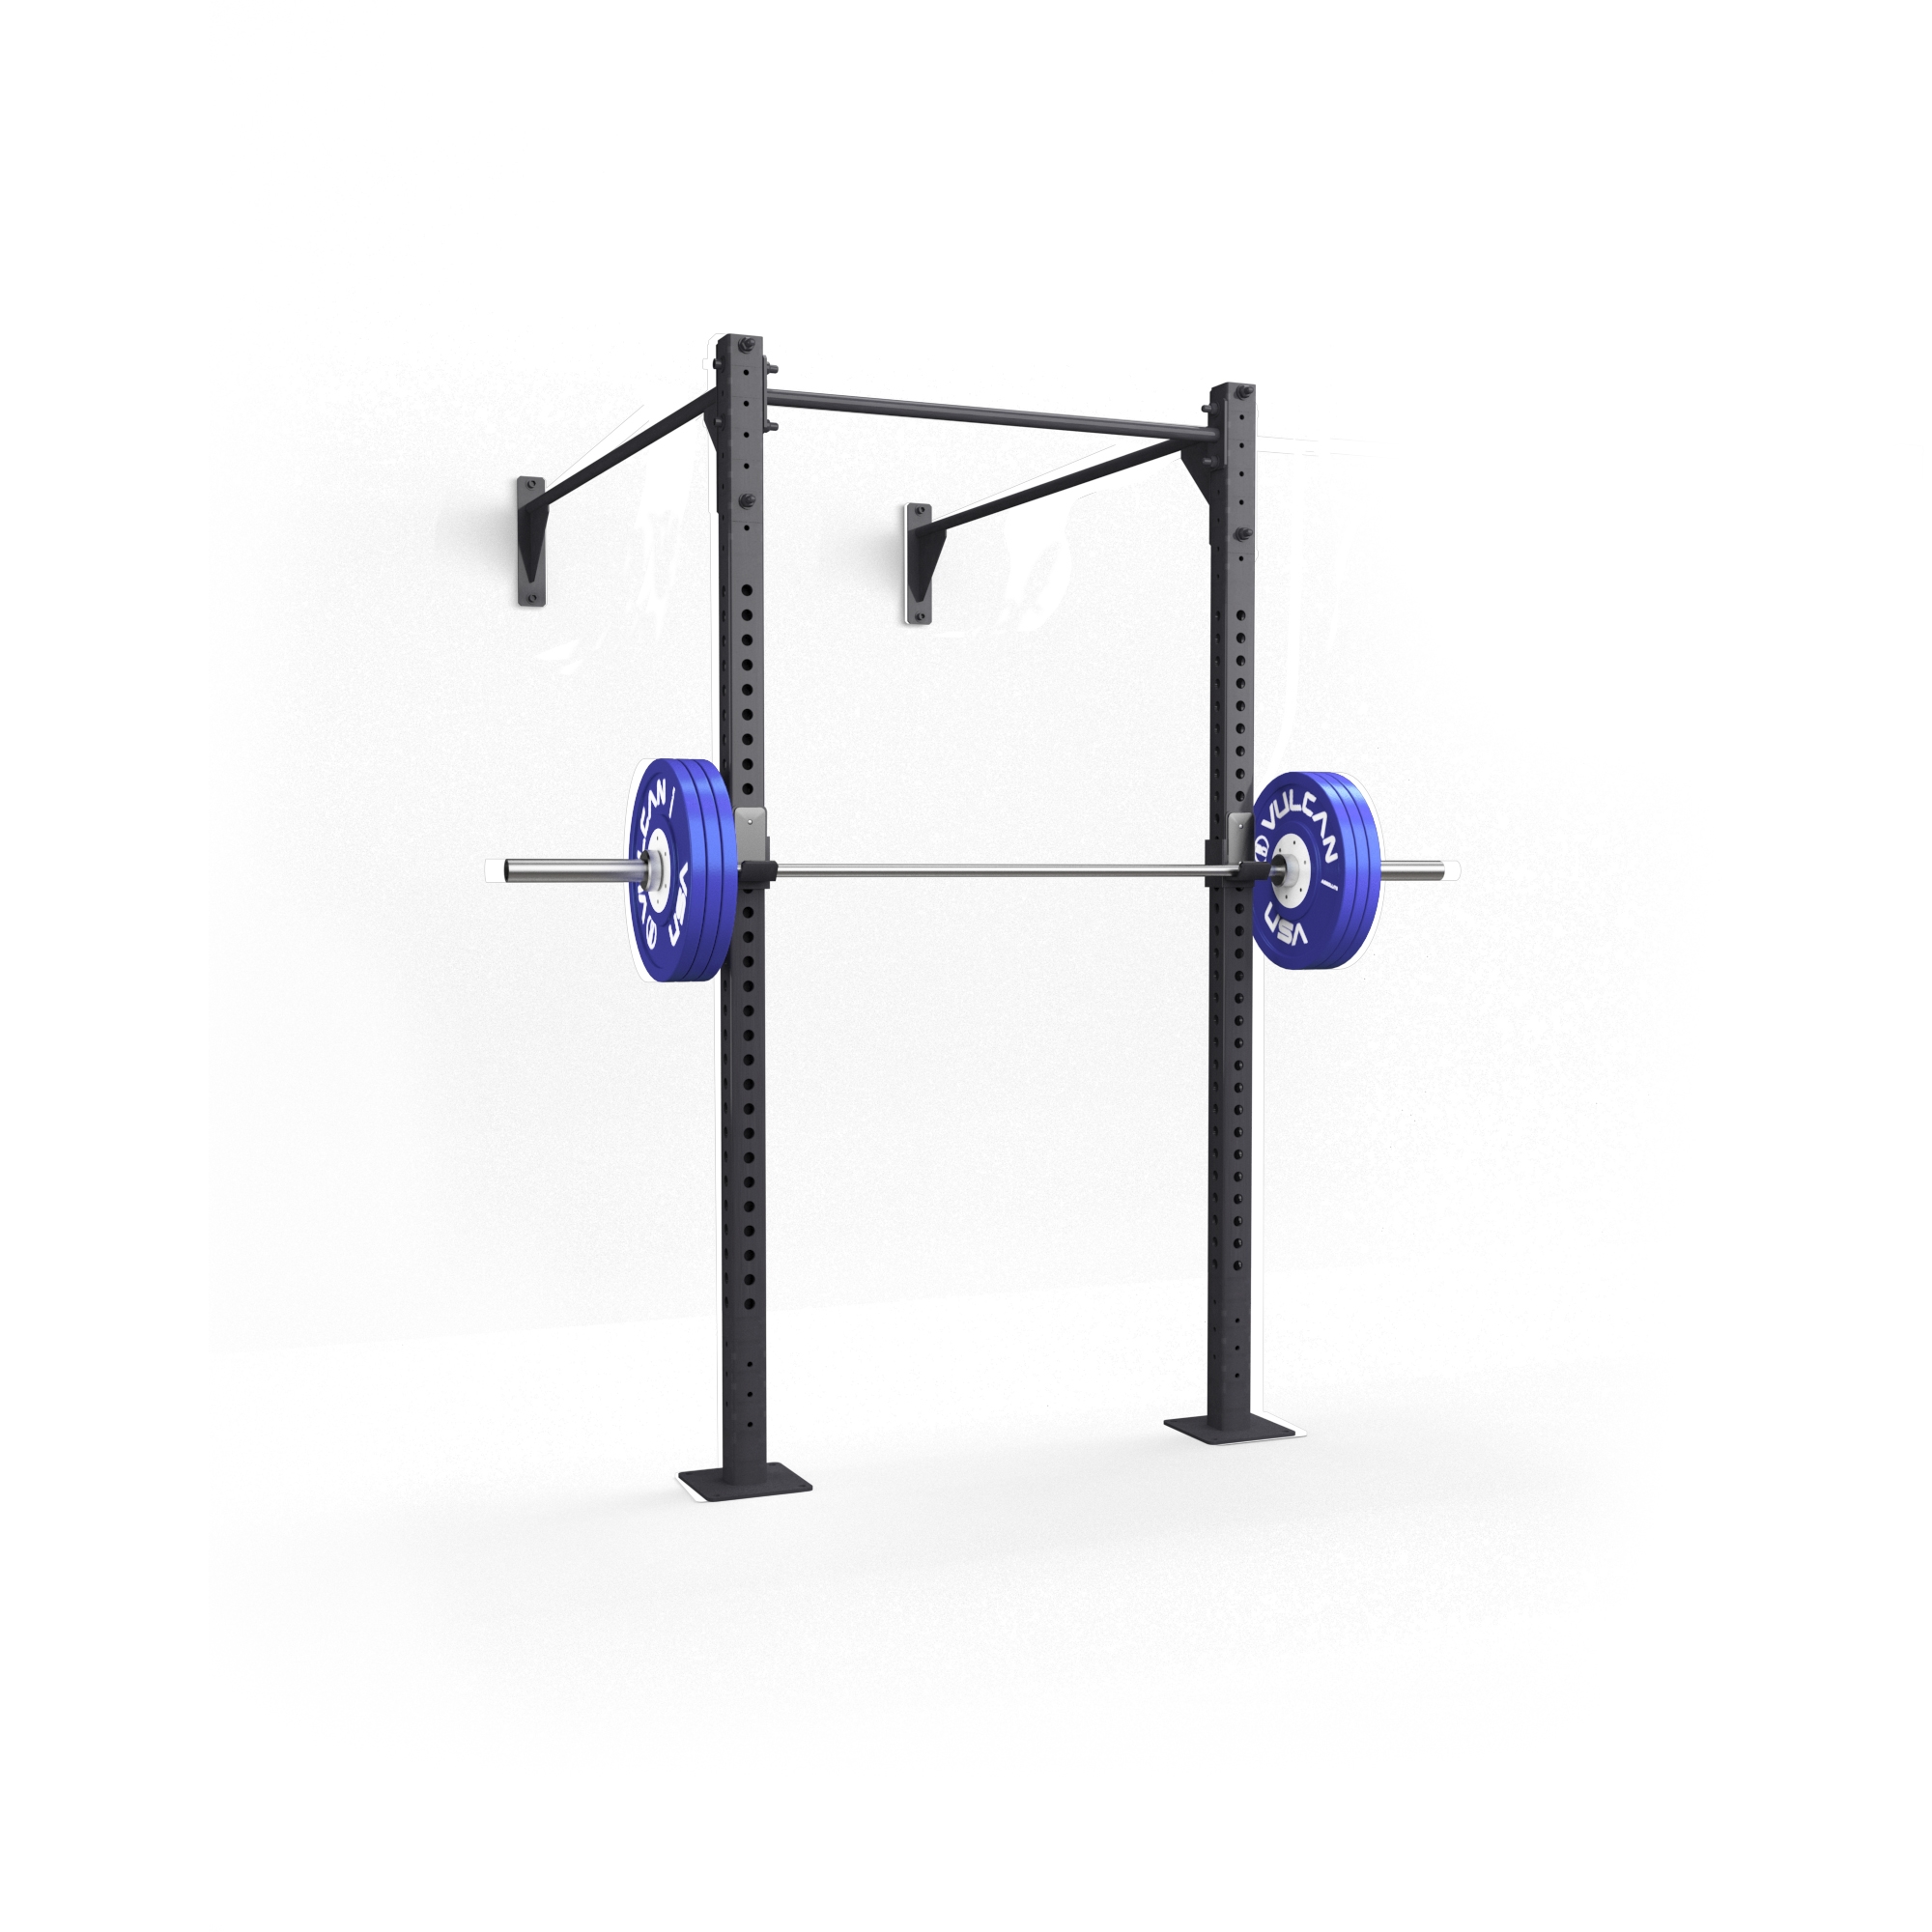 One Deep Wall Mounted Pull up Rig and Squat Rack